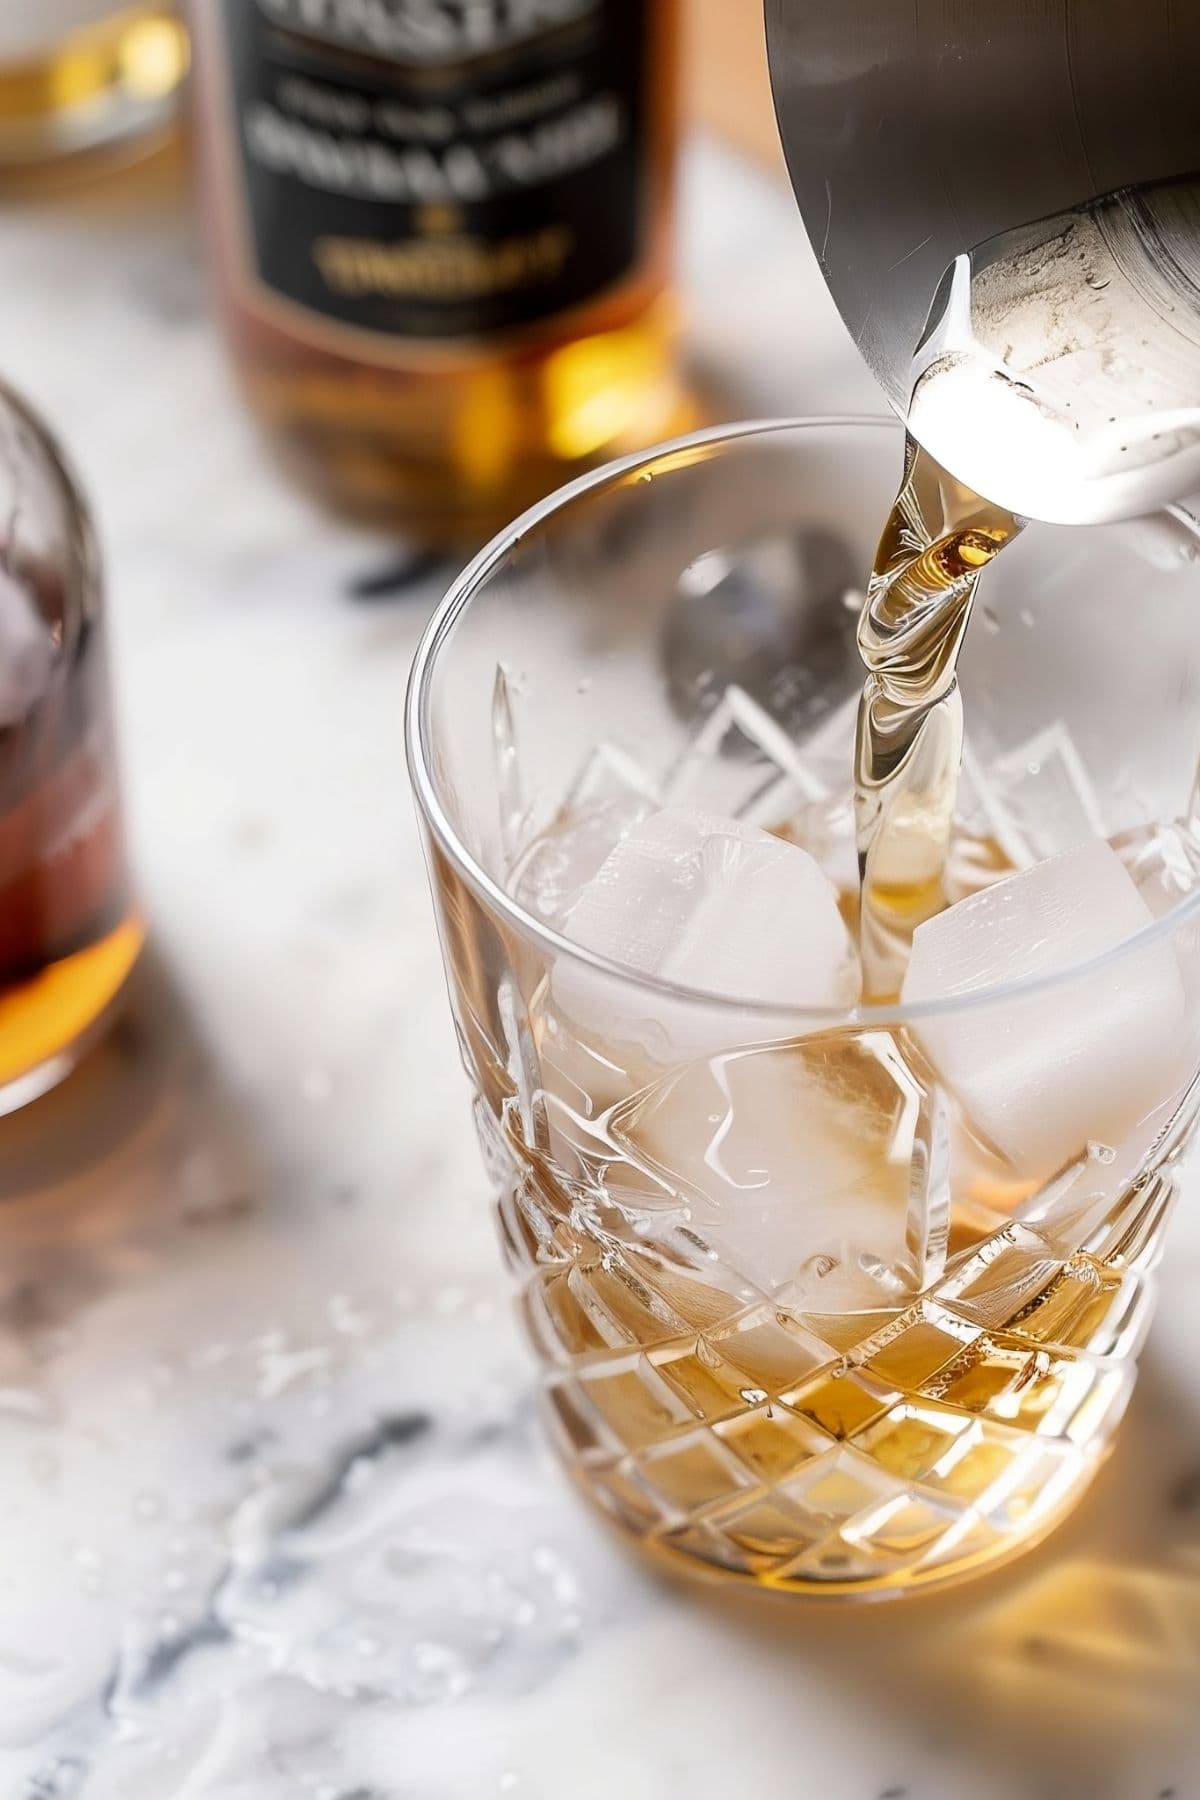 Pouring a Whiskey, Vermouth, and Cherry Liqueur Mixture into a Glass with Ice